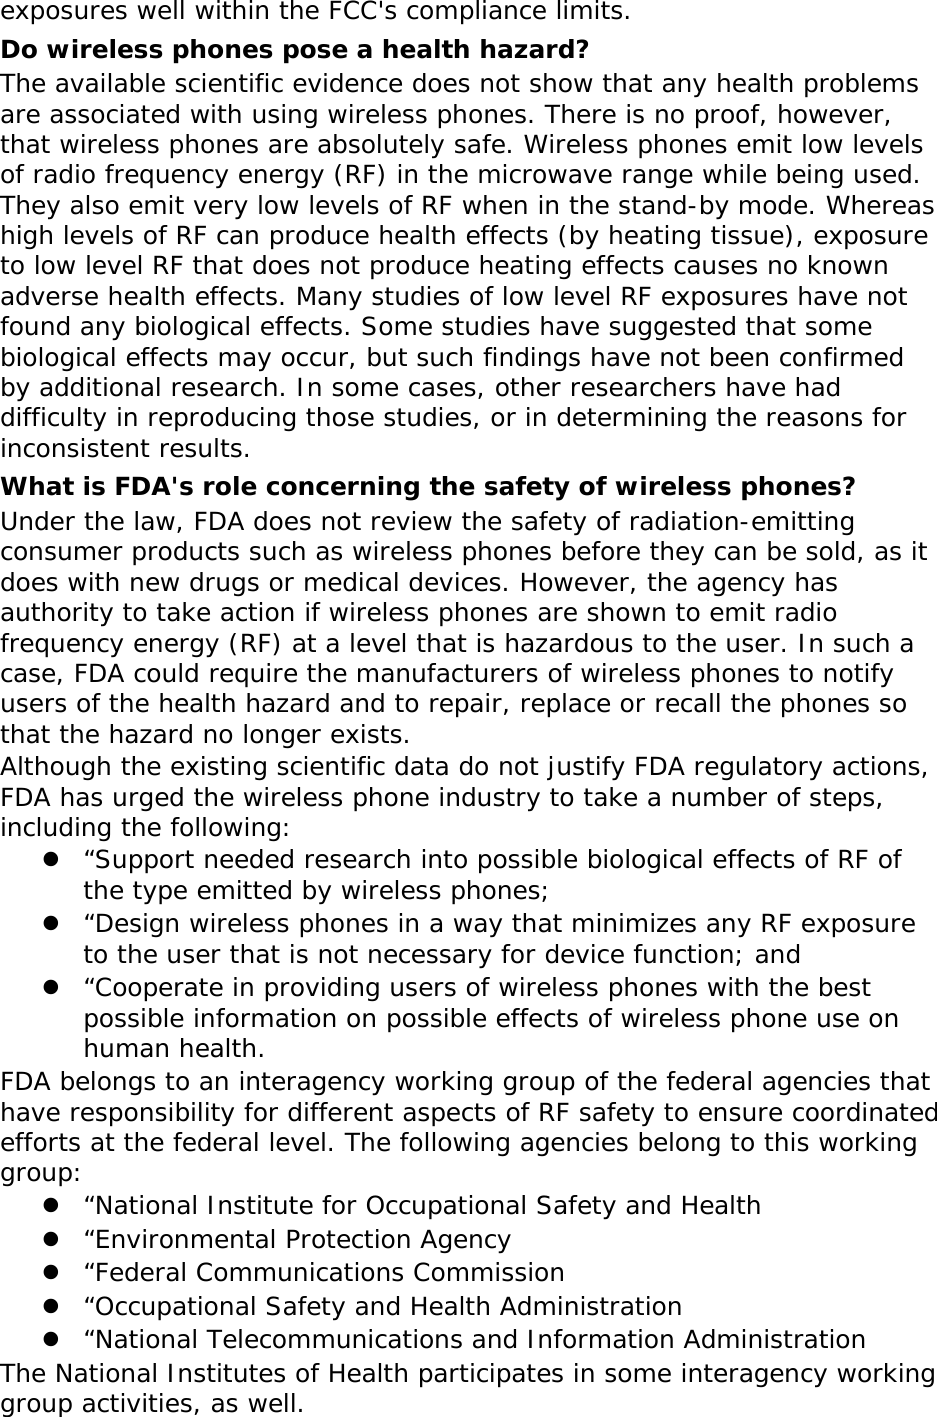 exposures well within the FCC&apos;s compliance limits. Do wireless phones pose a health hazard? The available scientific evidence does not show that any health problems are associated with using wireless phones. There is no proof, however, that wireless phones are absolutely safe. Wireless phones emit low levels of radio frequency energy (RF) in the microwave range while being used. They also emit very low levels of RF when in the stand-by mode. Whereas high levels of RF can produce health effects (by heating tissue), exposure to low level RF that does not produce heating effects causes no known adverse health effects. Many studies of low level RF exposures have not found any biological effects. Some studies have suggested that some biological effects may occur, but such findings have not been confirmed by additional research. In some cases, other researchers have had difficulty in reproducing those studies, or in determining the reasons for inconsistent results. What is FDA&apos;s role concerning the safety of wireless phones? Under the law, FDA does not review the safety of radiation-emitting consumer products such as wireless phones before they can be sold, as it does with new drugs or medical devices. However, the agency has authority to take action if wireless phones are shown to emit radio frequency energy (RF) at a level that is hazardous to the user. In such a case, FDA could require the manufacturers of wireless phones to notify users of the health hazard and to repair, replace or recall the phones so that the hazard no longer exists. Although the existing scientific data do not justify FDA regulatory actions, FDA has urged the wireless phone industry to take a number of steps, including the following: z “Support needed research into possible biological effects of RF of the type emitted by wireless phones; z “Design wireless phones in a way that minimizes any RF exposure to the user that is not necessary for device function; and z “Cooperate in providing users of wireless phones with the best possible information on possible effects of wireless phone use on human health. FDA belongs to an interagency working group of the federal agencies that have responsibility for different aspects of RF safety to ensure coordinated efforts at the federal level. The following agencies belong to this working group: z “National Institute for Occupational Safety and Health z “Environmental Protection Agency z “Federal Communications Commission z “Occupational Safety and Health Administration z “National Telecommunications and Information Administration The National Institutes of Health participates in some interagency working group activities, as well. 